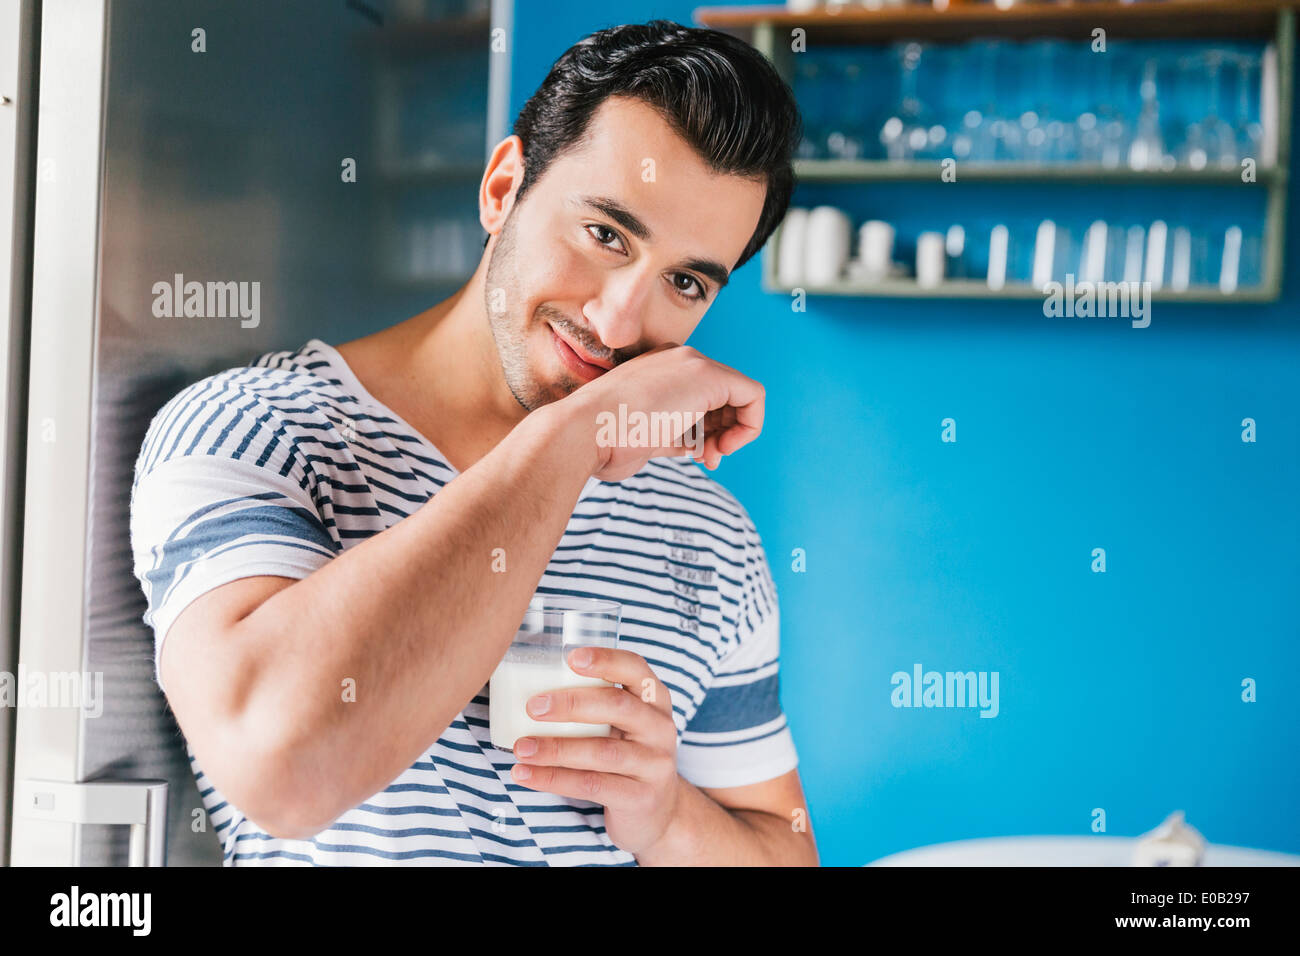 Portrait of smiling young man wiping off his milk moustache Stock Photo